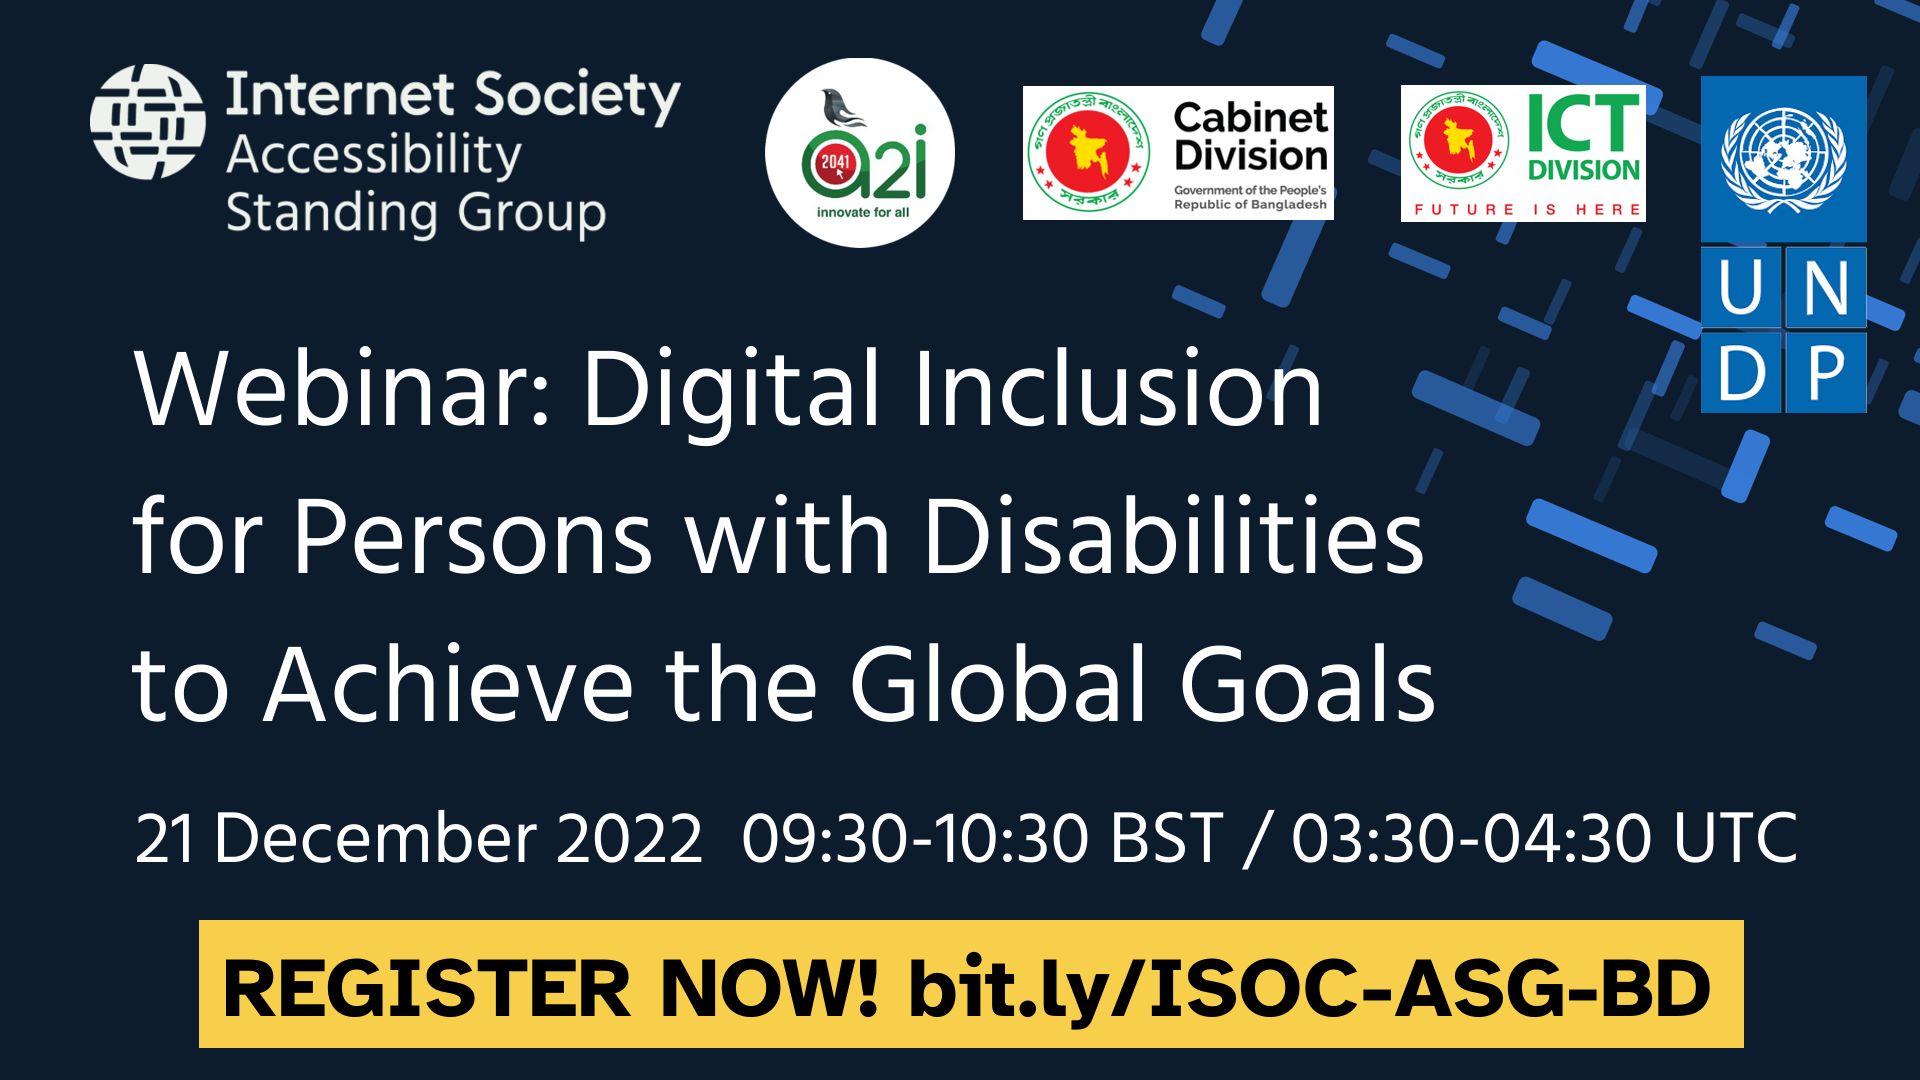 Webinar: Digital Inclusion for Persons with Disabilities to Achieve the Global Goals